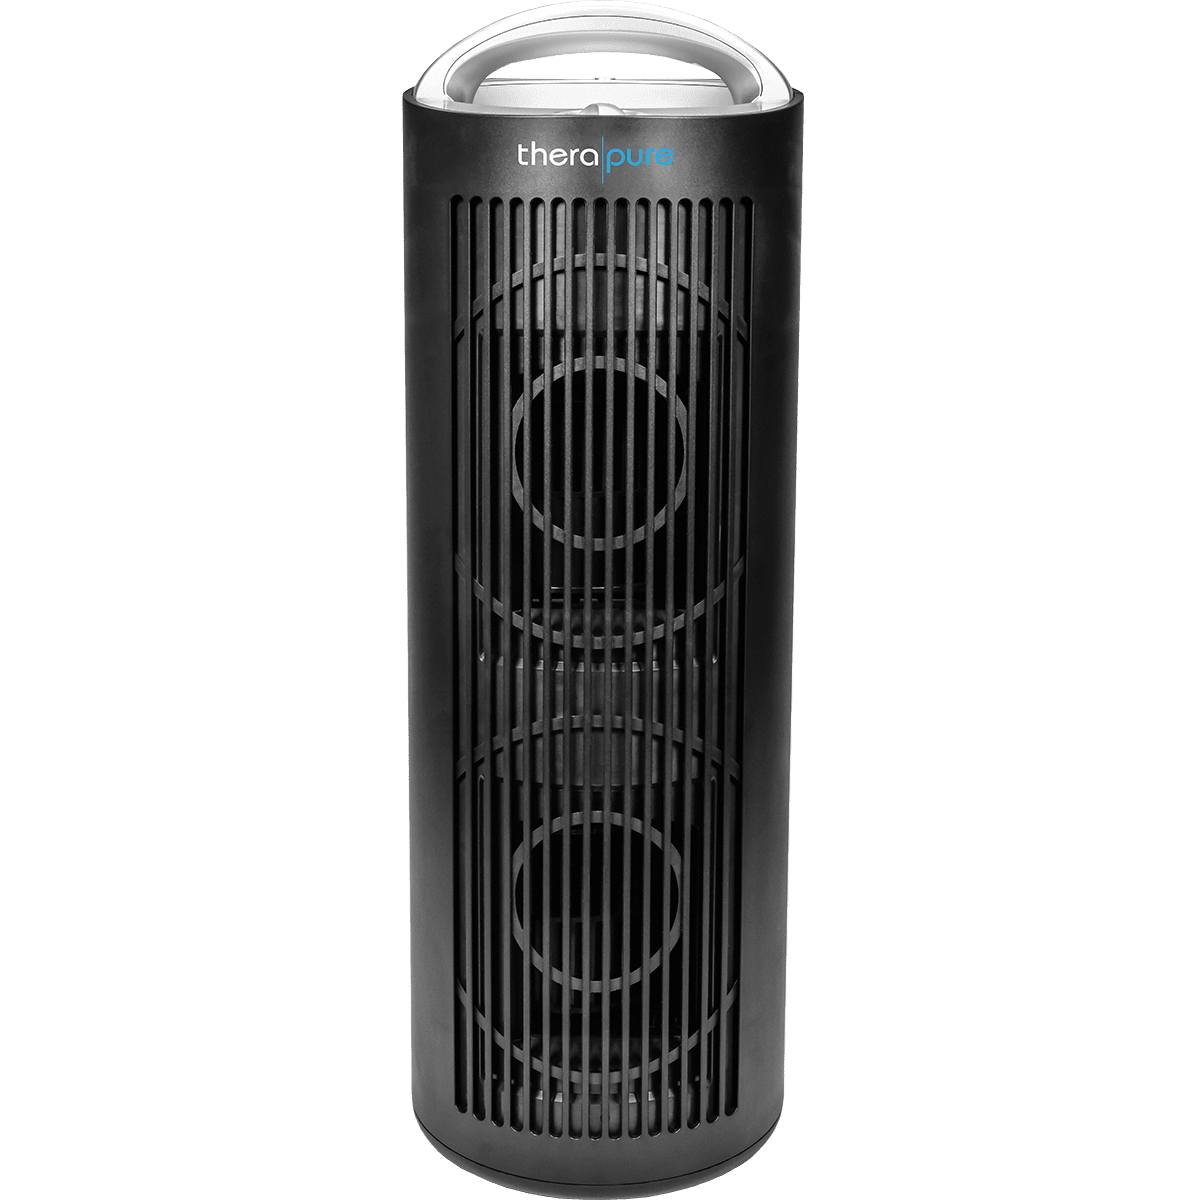 therapure air purifier tpp640s